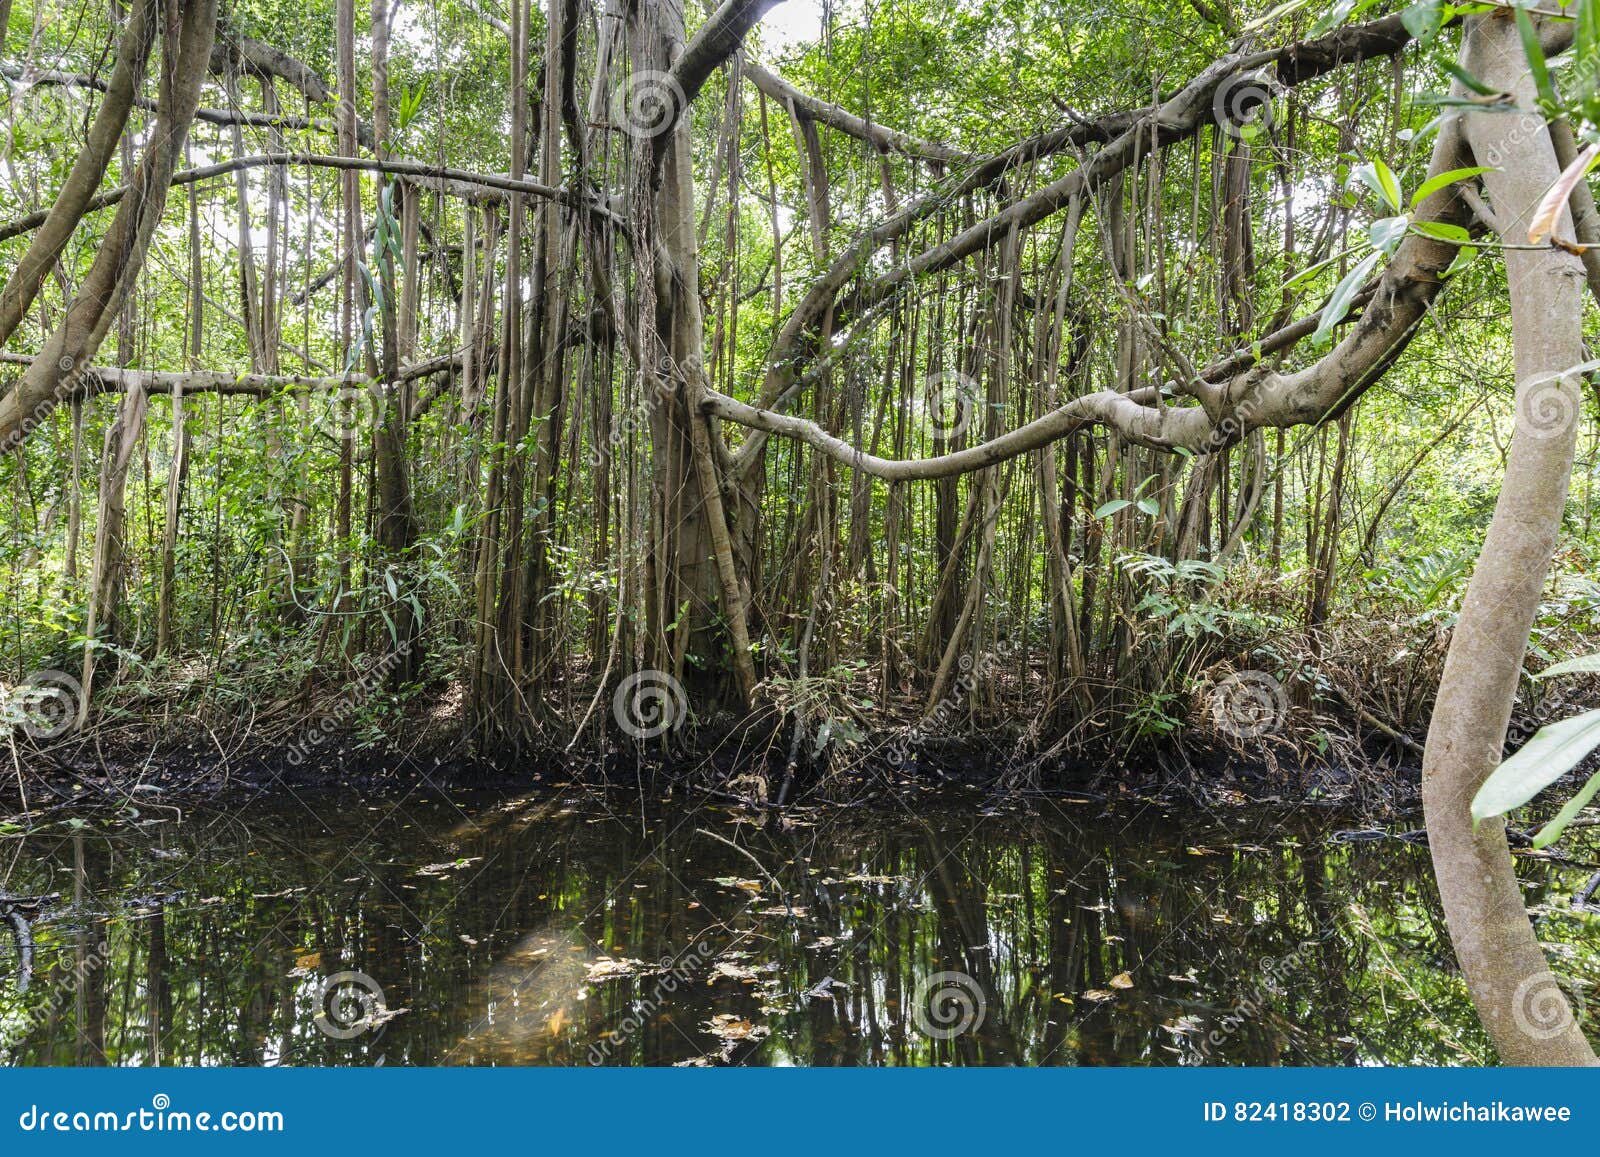 banyan tree and watercourse in the jungle